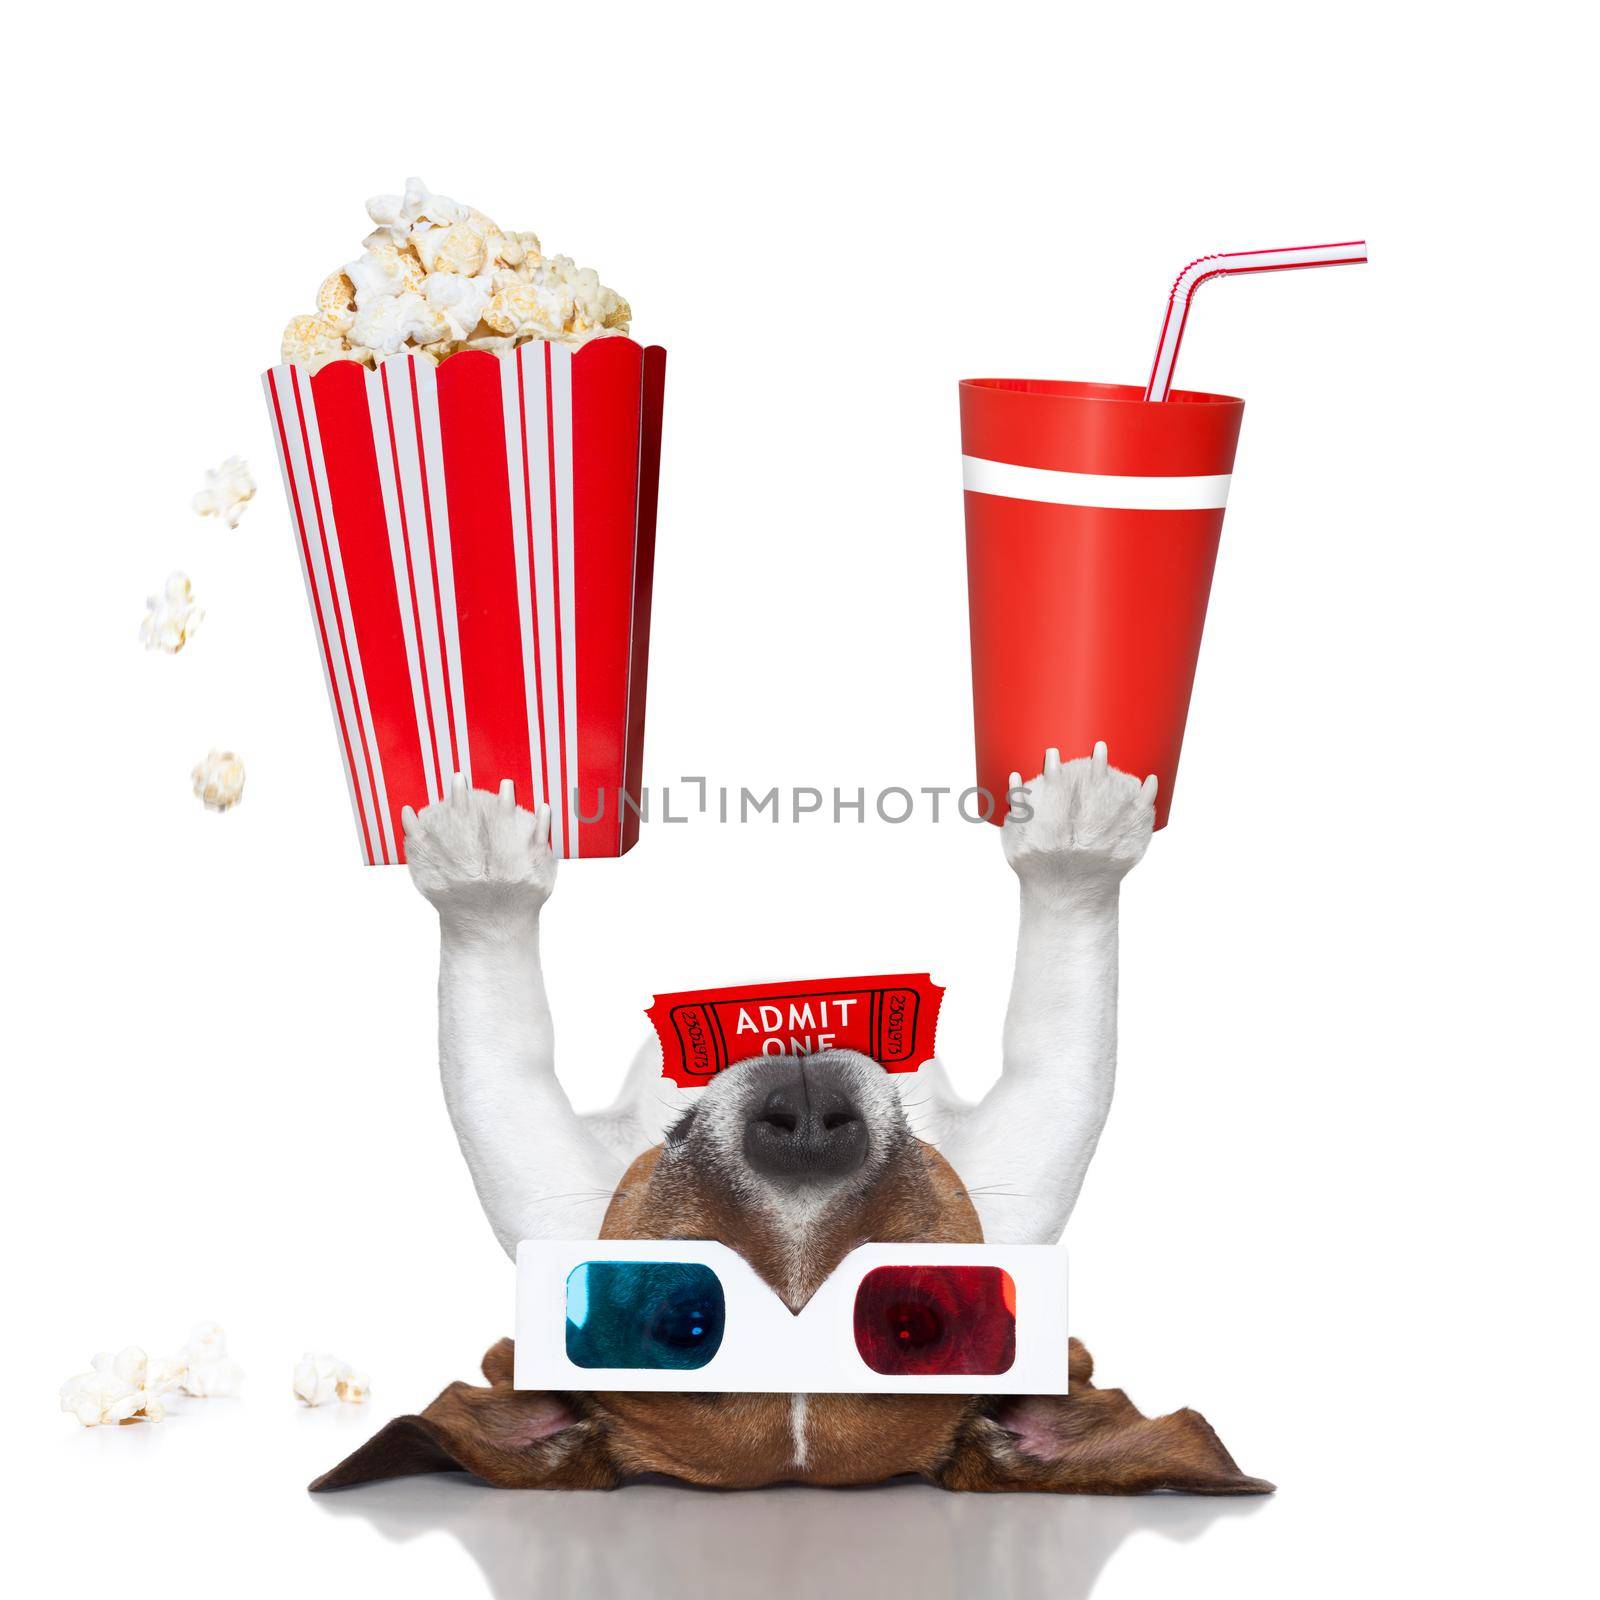 movie dog up side down holding popcorn and coke